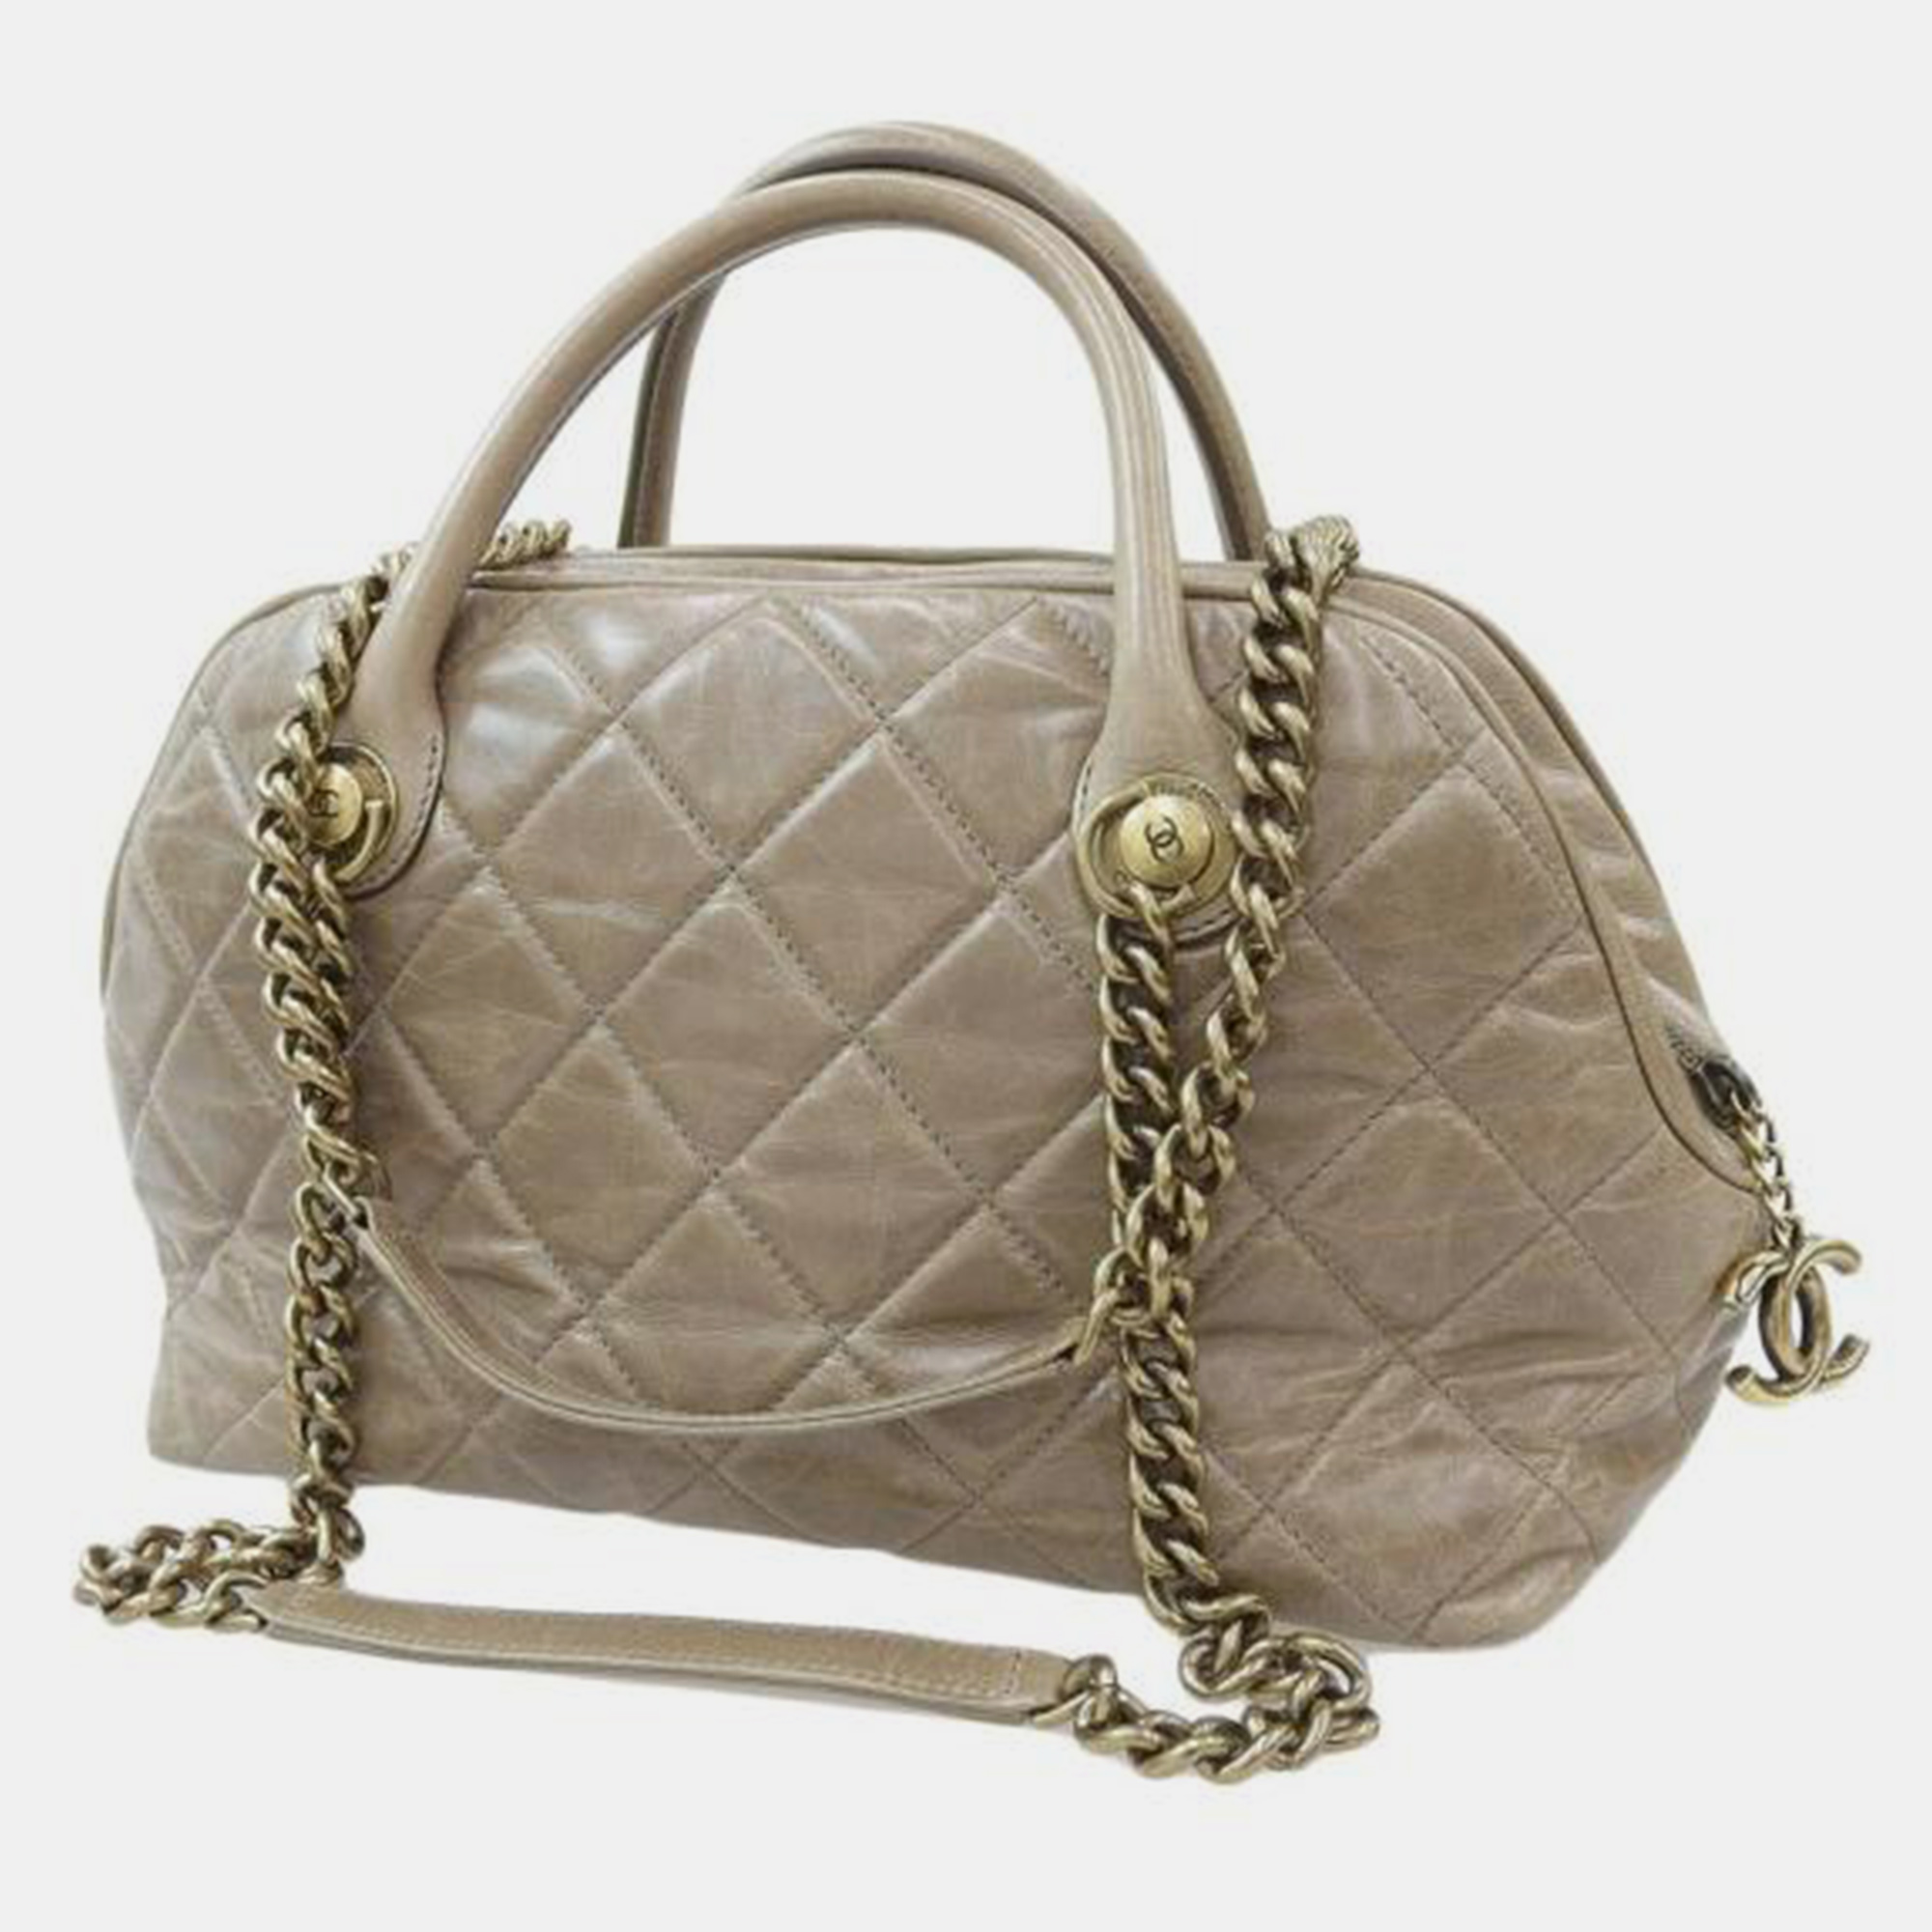 Chanel brown quilted leather bowler bag